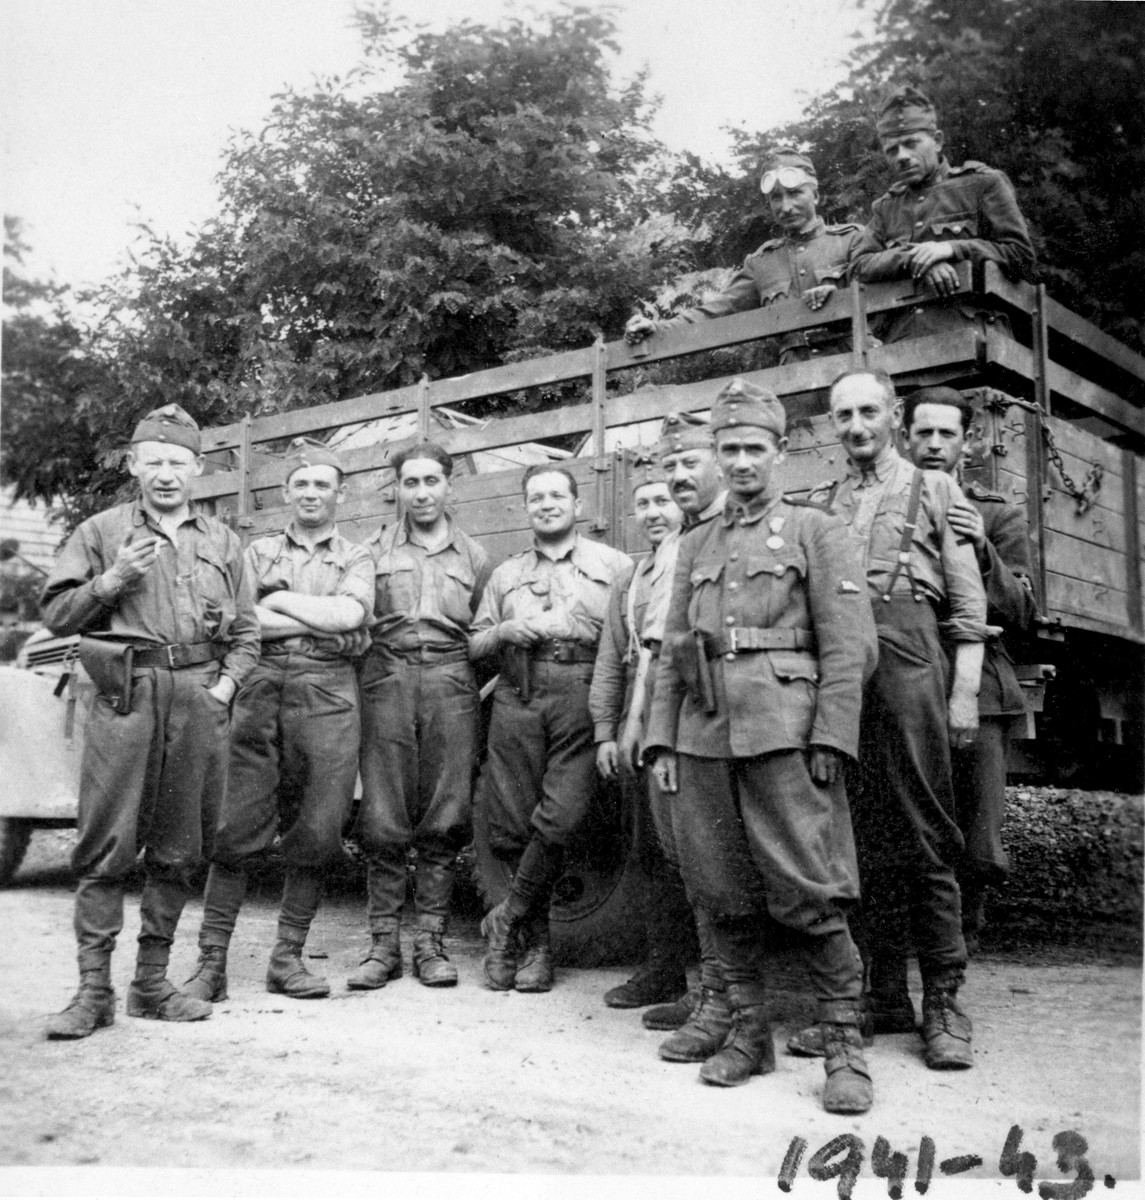 A unit of Hungarian soldiers that includes a Jew from Budapest, poses in front of a truck.

Among those pictured is Gyula Spitz (second from the left).